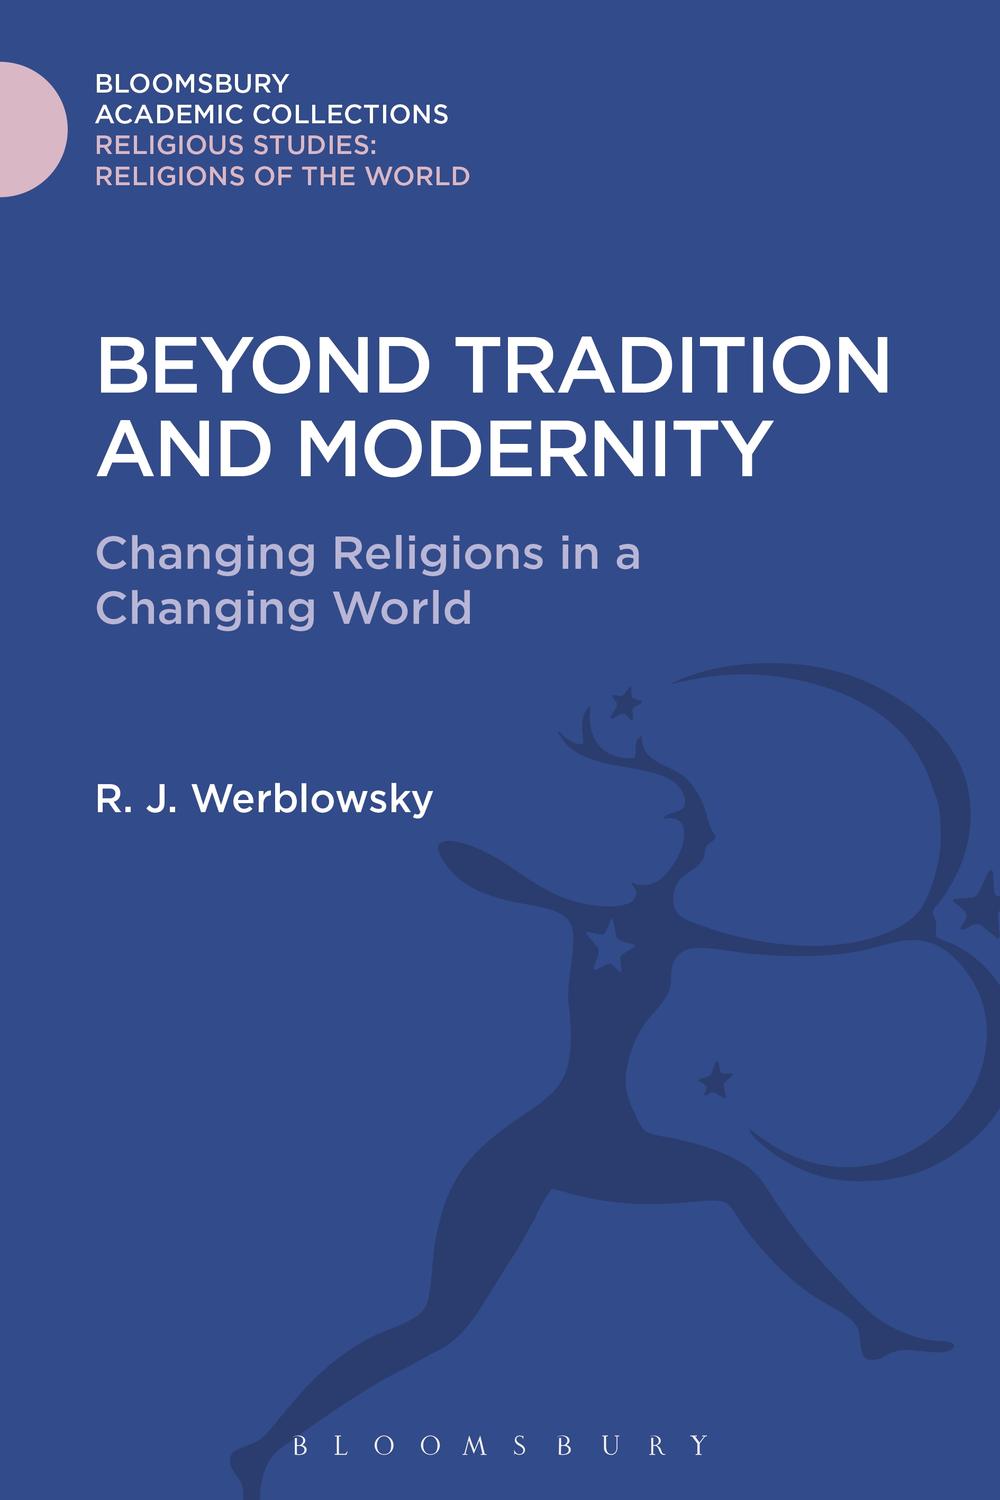 Beyond Tradition and Modernity - R. J. Werblowsky